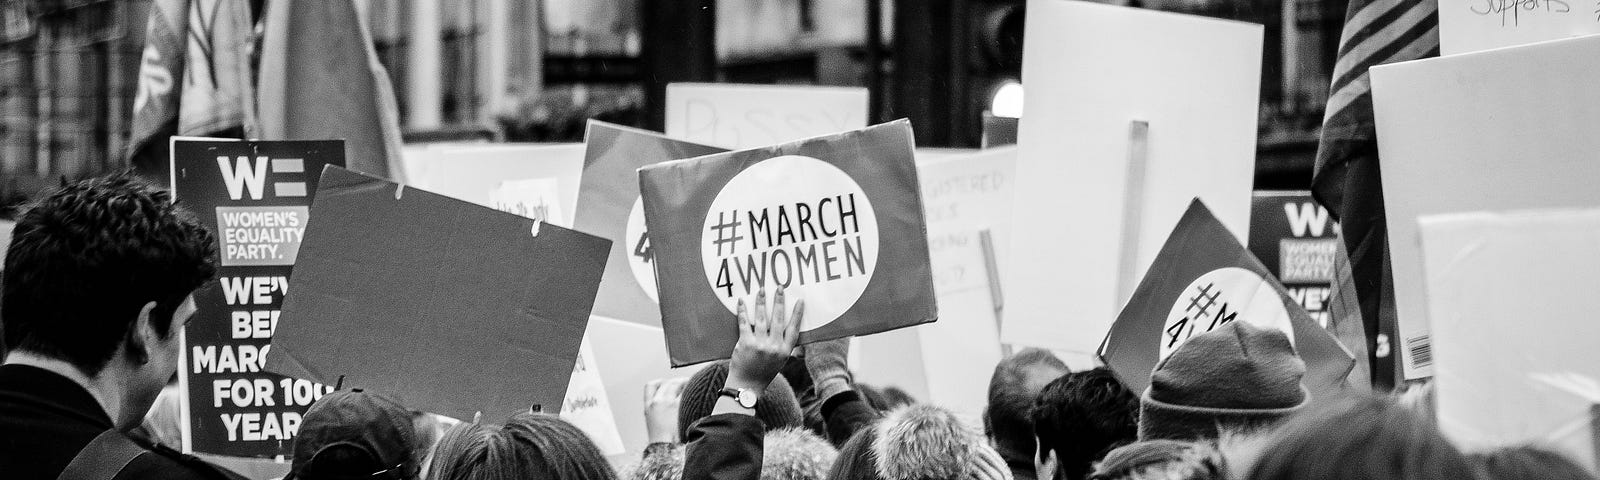 black and white photo of a #march4women